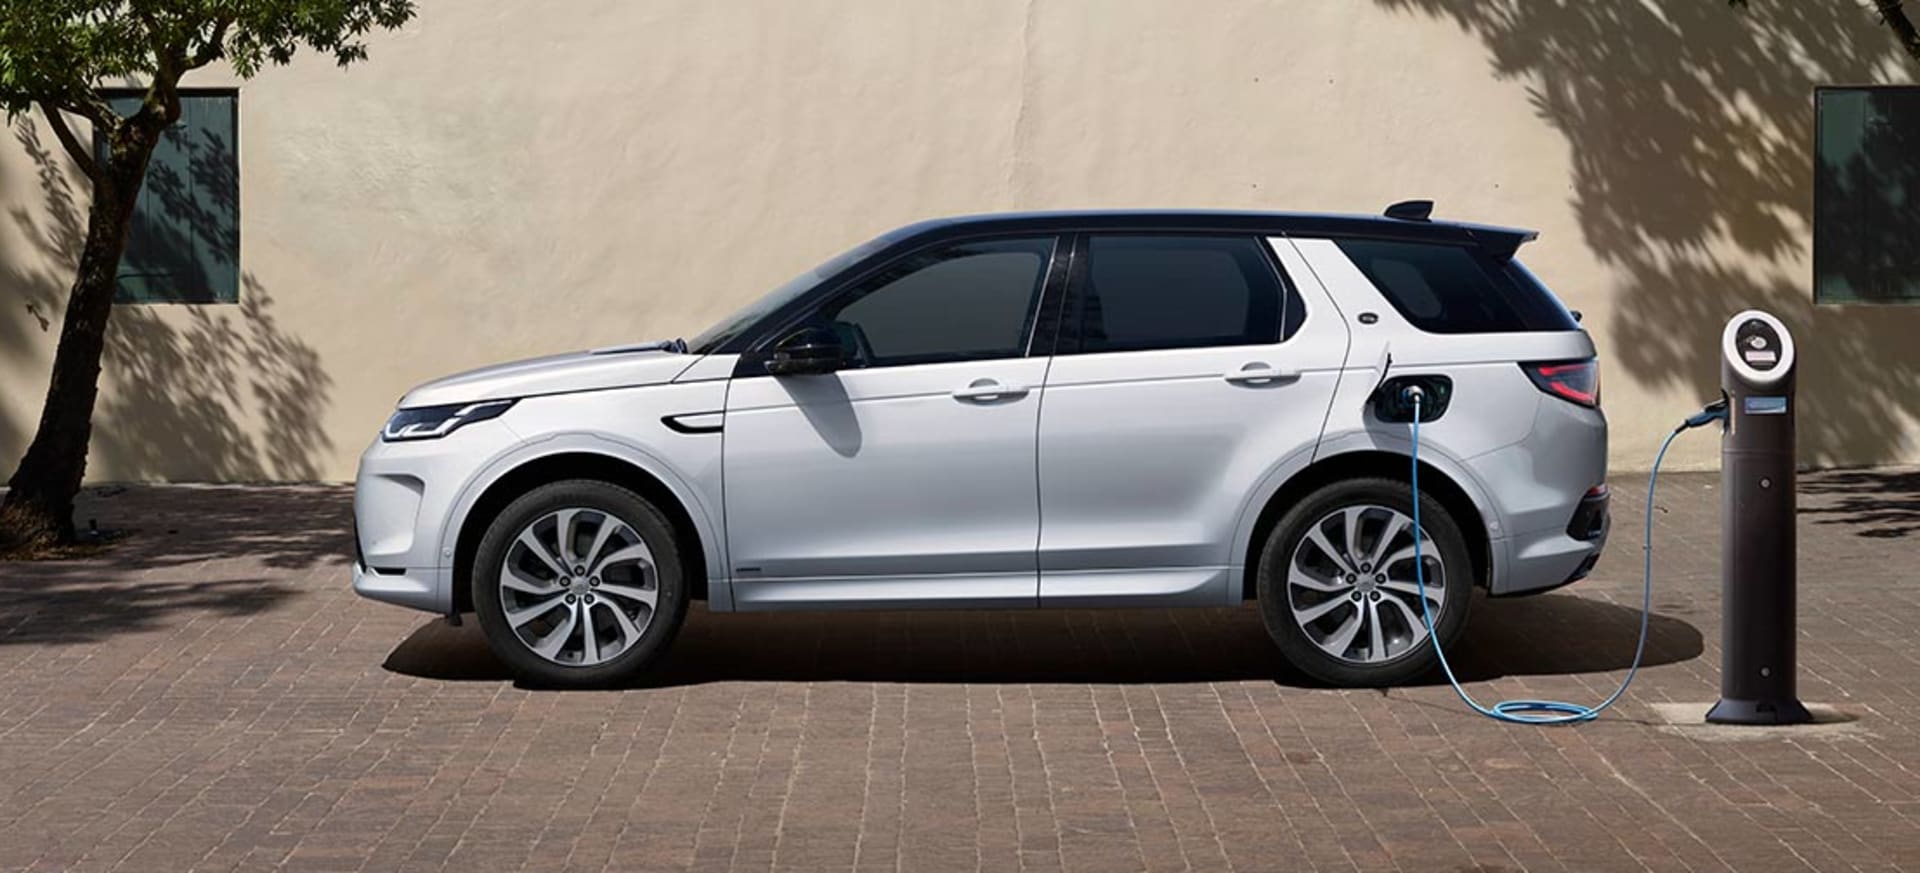 LAND ROVER DISCOVERY SPORT ELECTRIC HYBRID